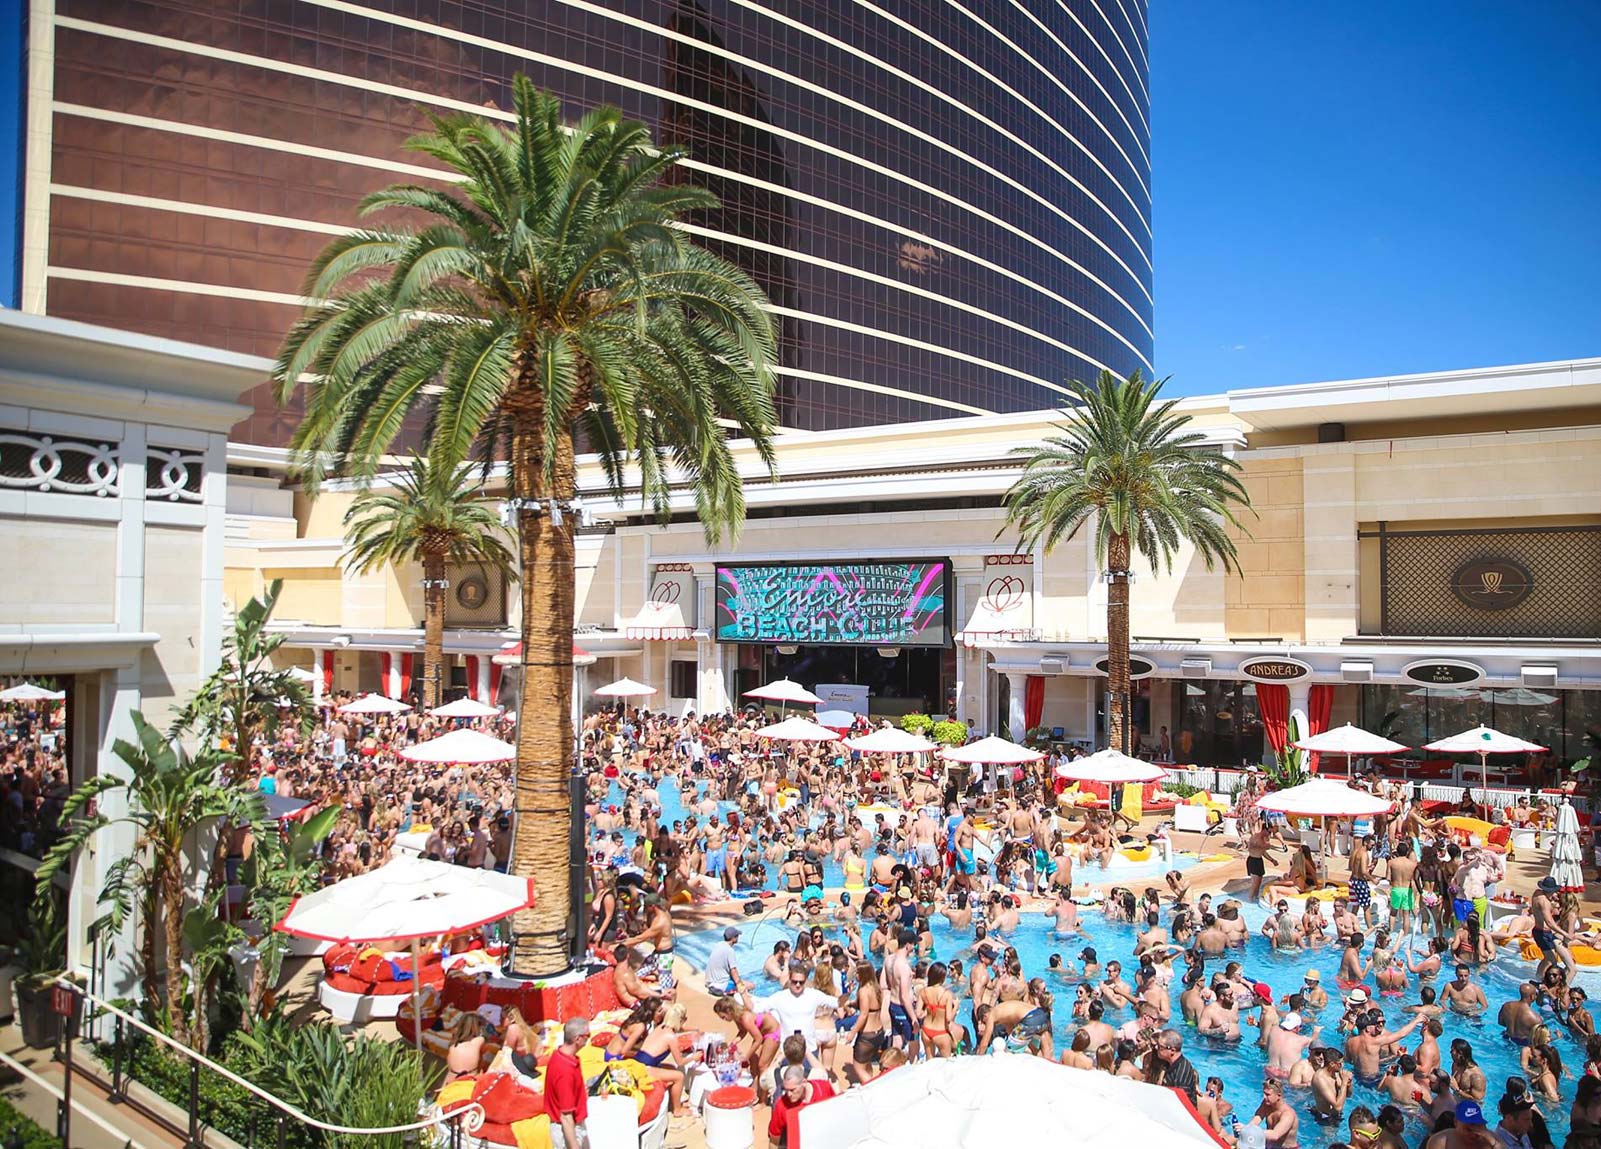 12 Insider Tips to the Top 12 Las Vegas Dayclubs & Pool Parties | VPP